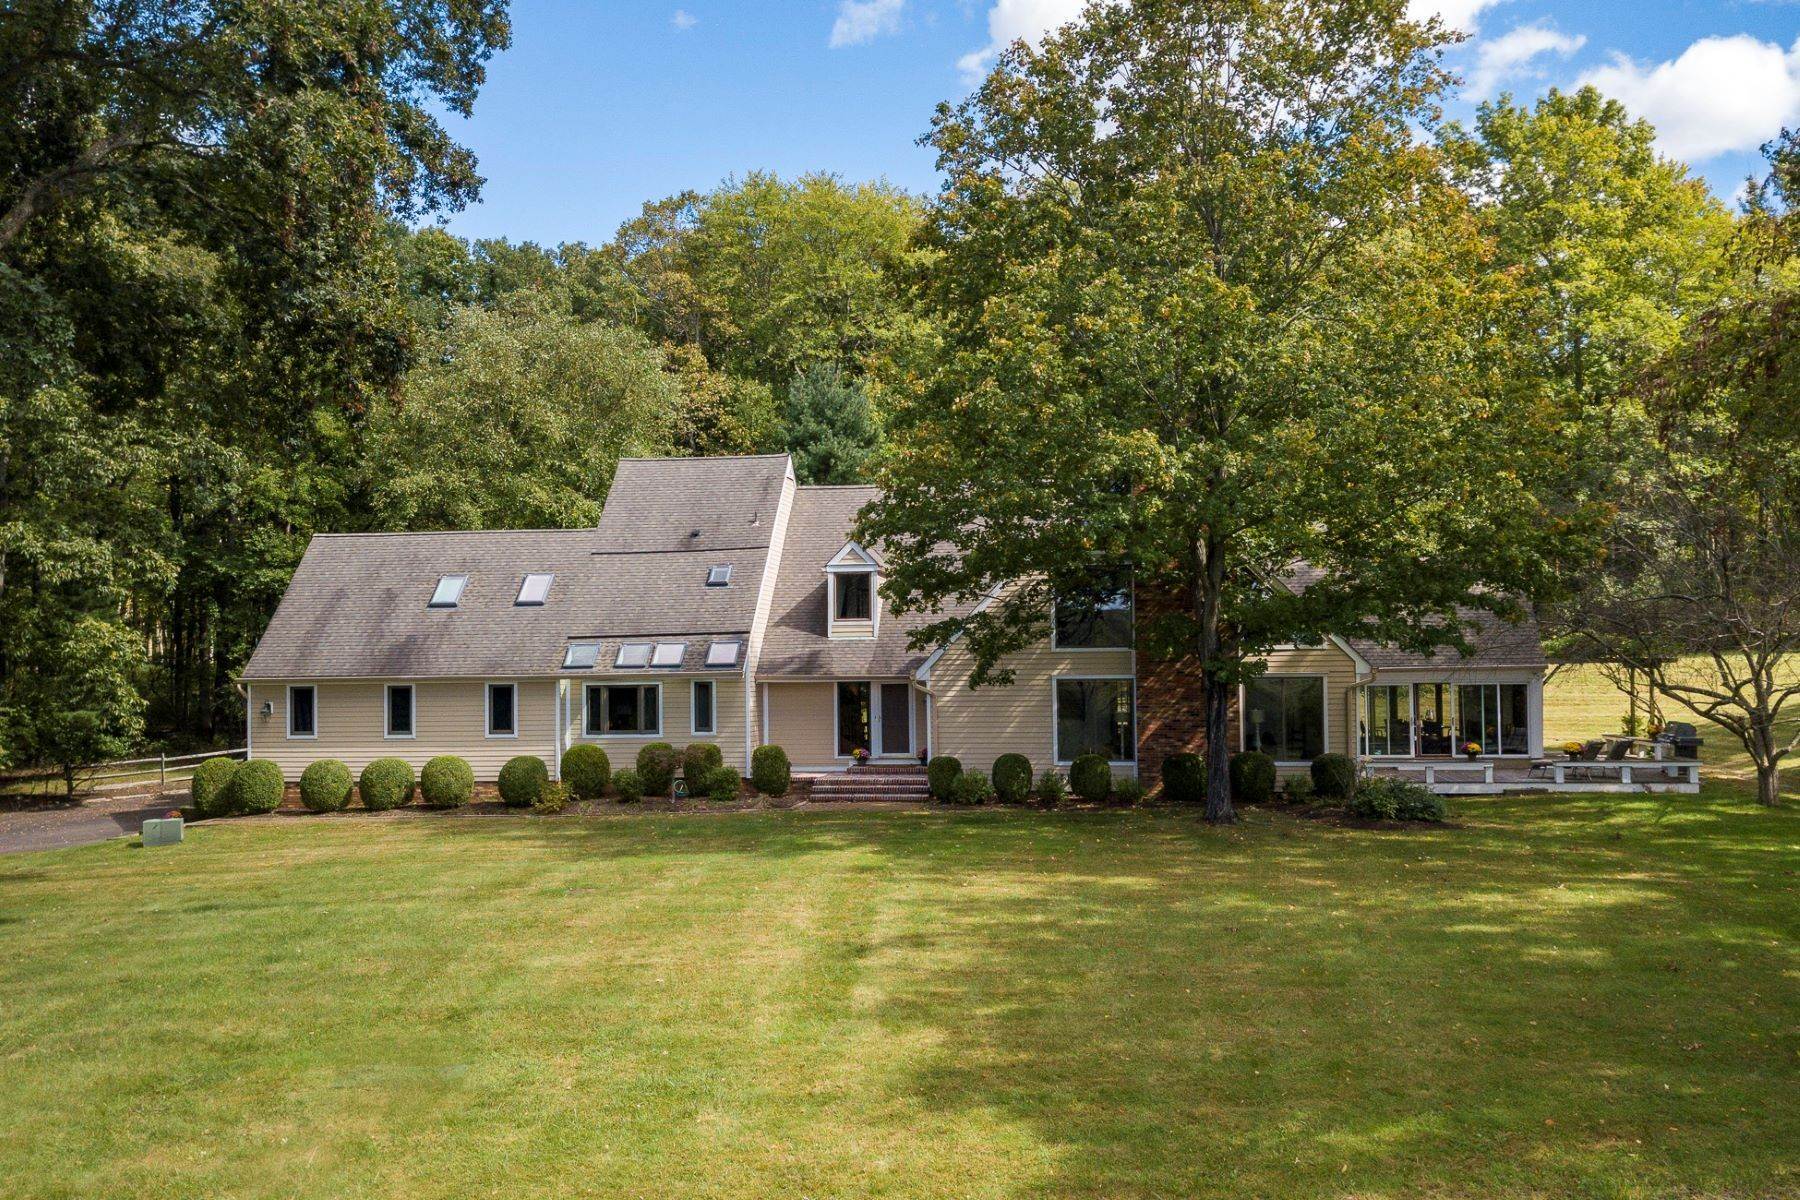 44. Farm and Ranch Properties for Sale at Soothing Spaces, Delightful Views 241 Hopewell Amwell Road, Hopewell, New Jersey 08525 United States